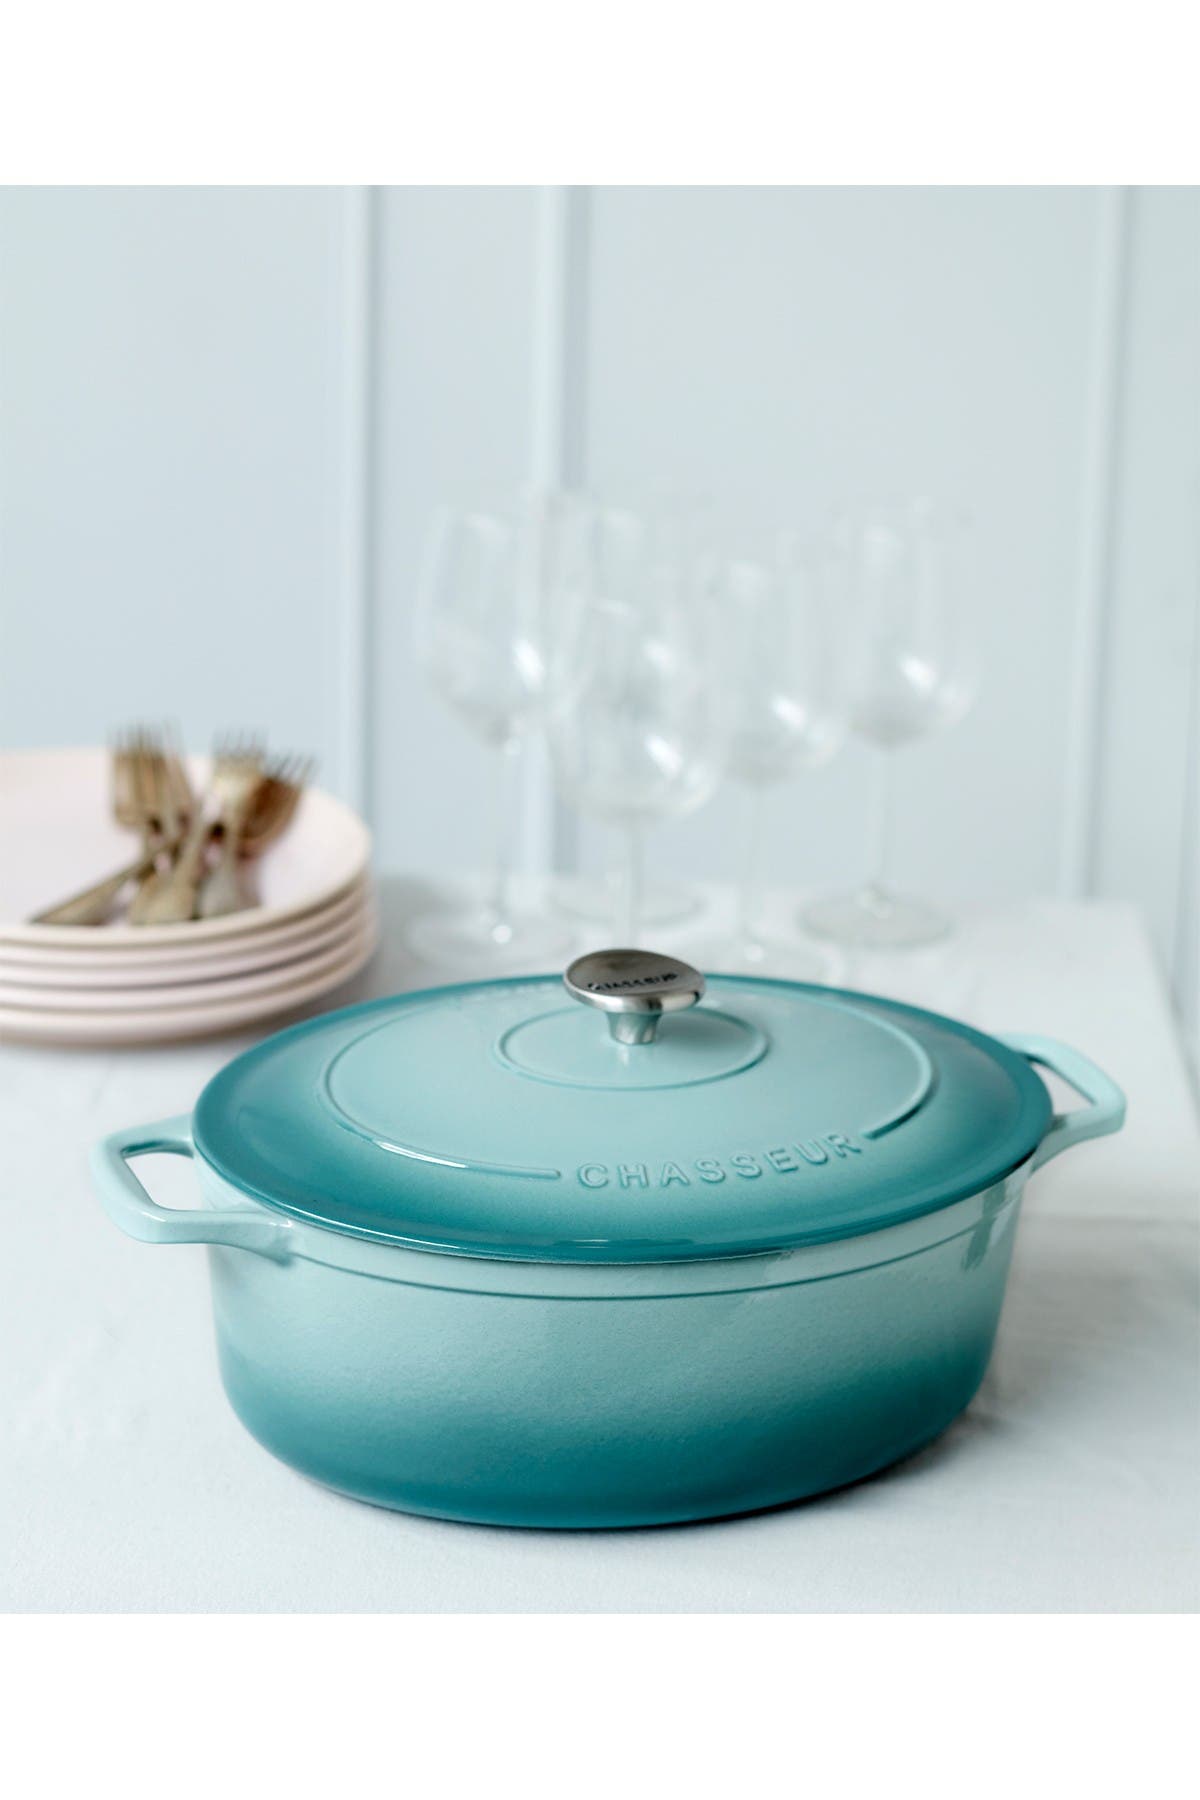 French Home Chasseur French 5.3-quart Enameled Cast Iron Oval Dutch Oven In Blue